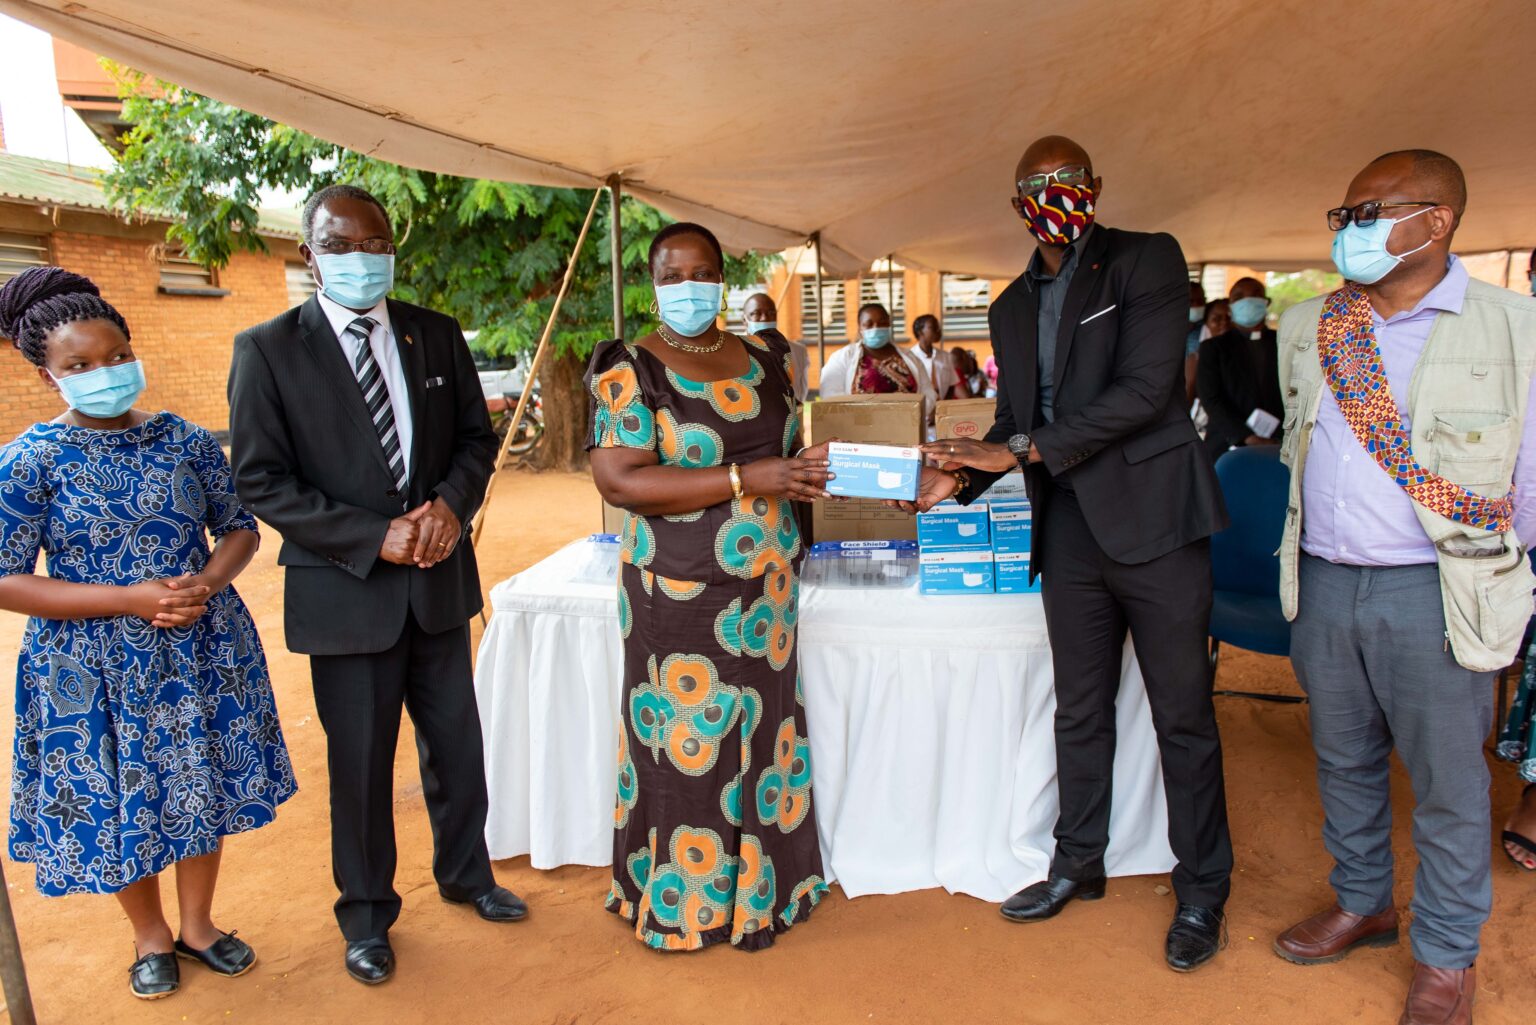 Millions Of Ppe Donated To Malawis Ministry Of Health For Community